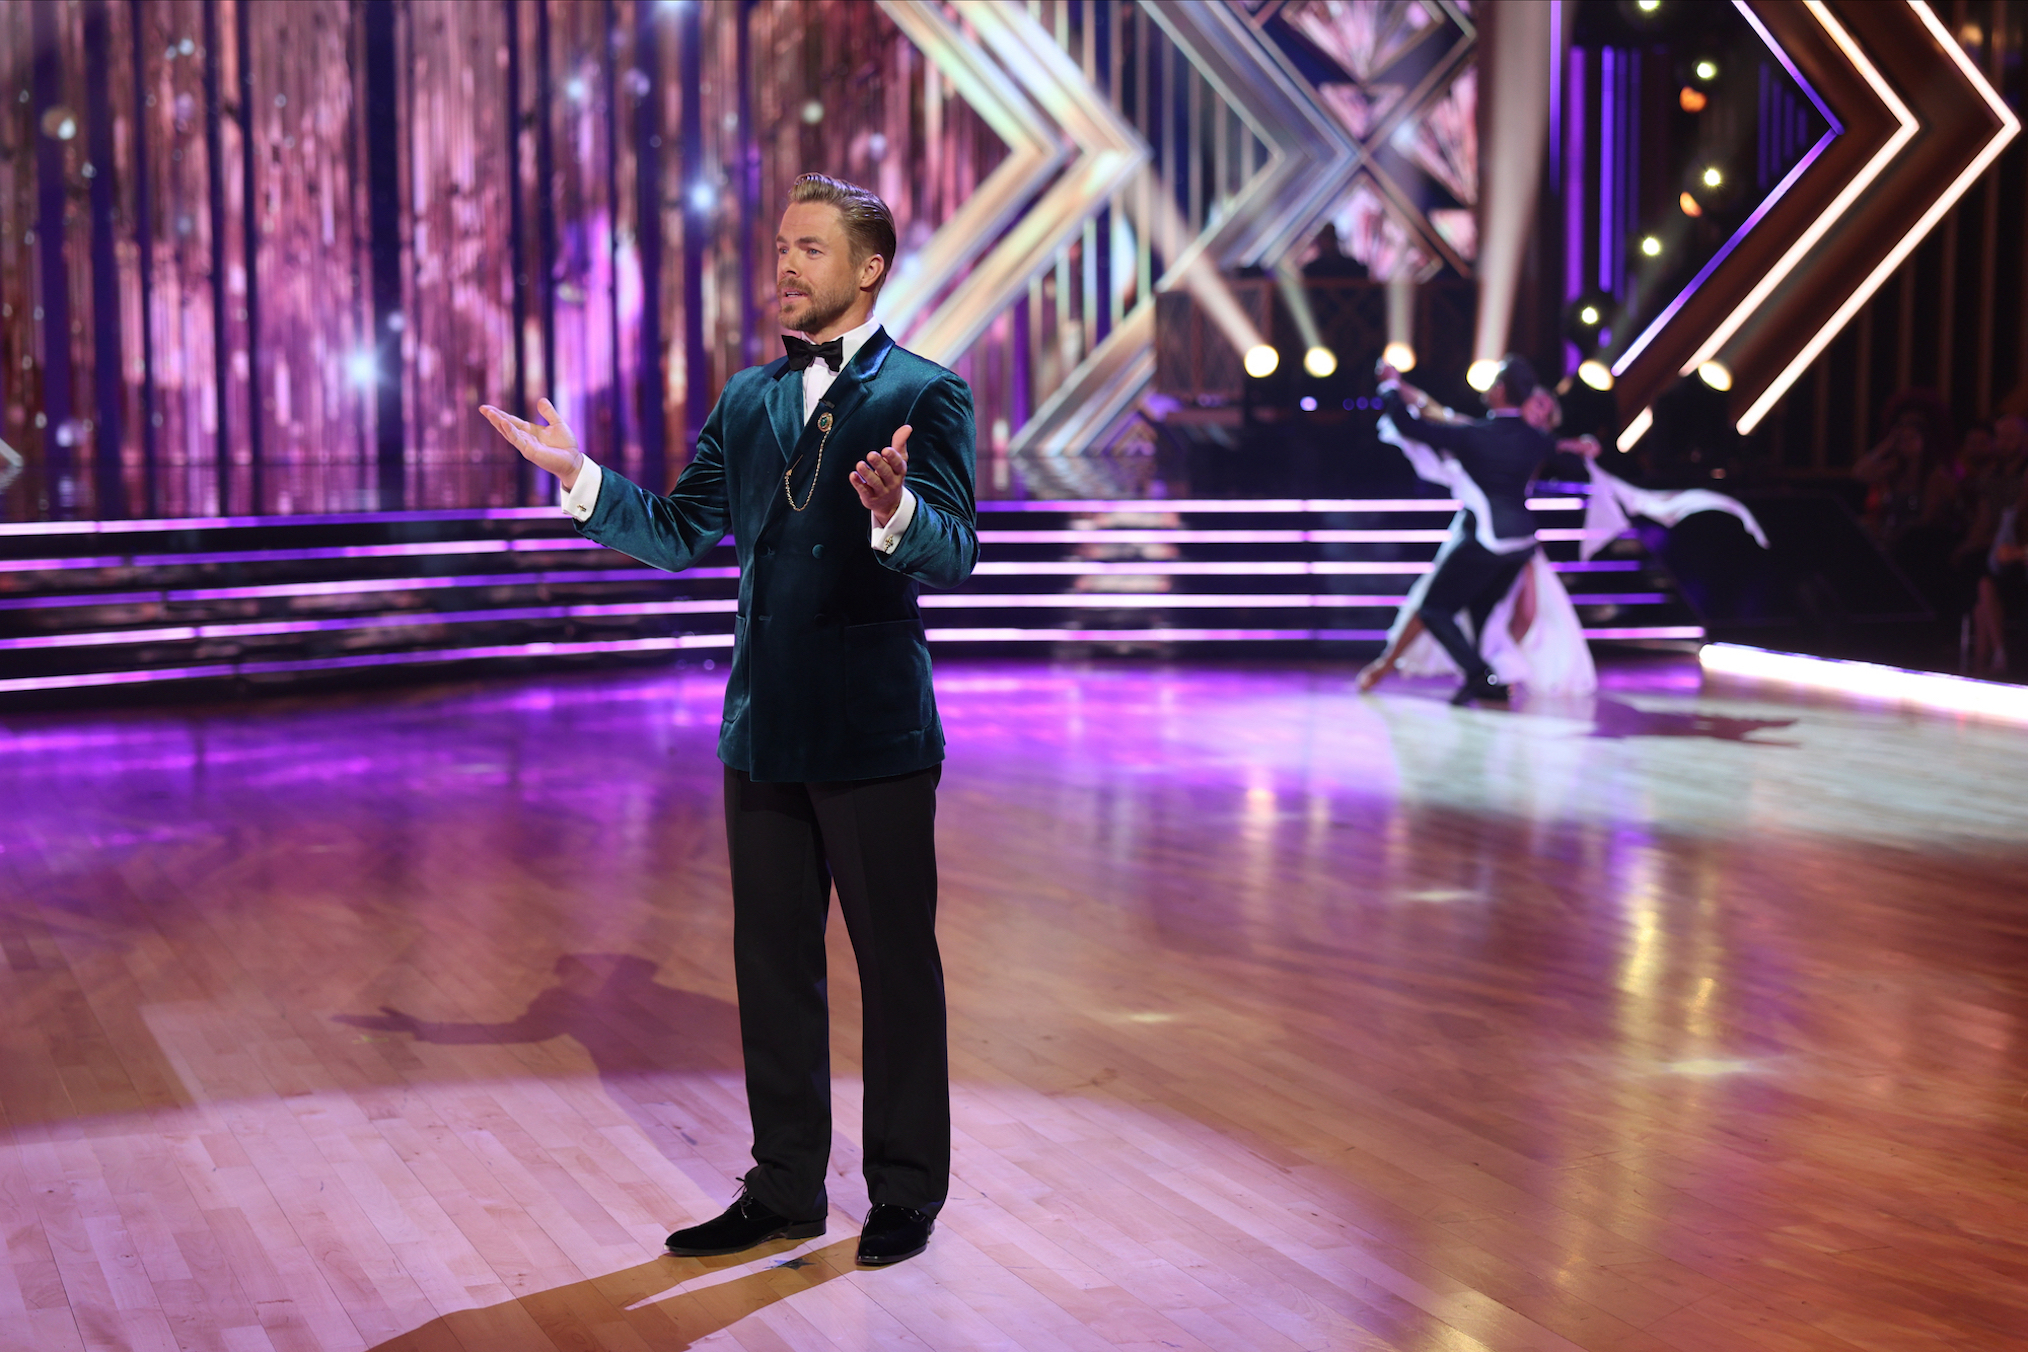 Derek Hough in 'Dancing With the Stars'